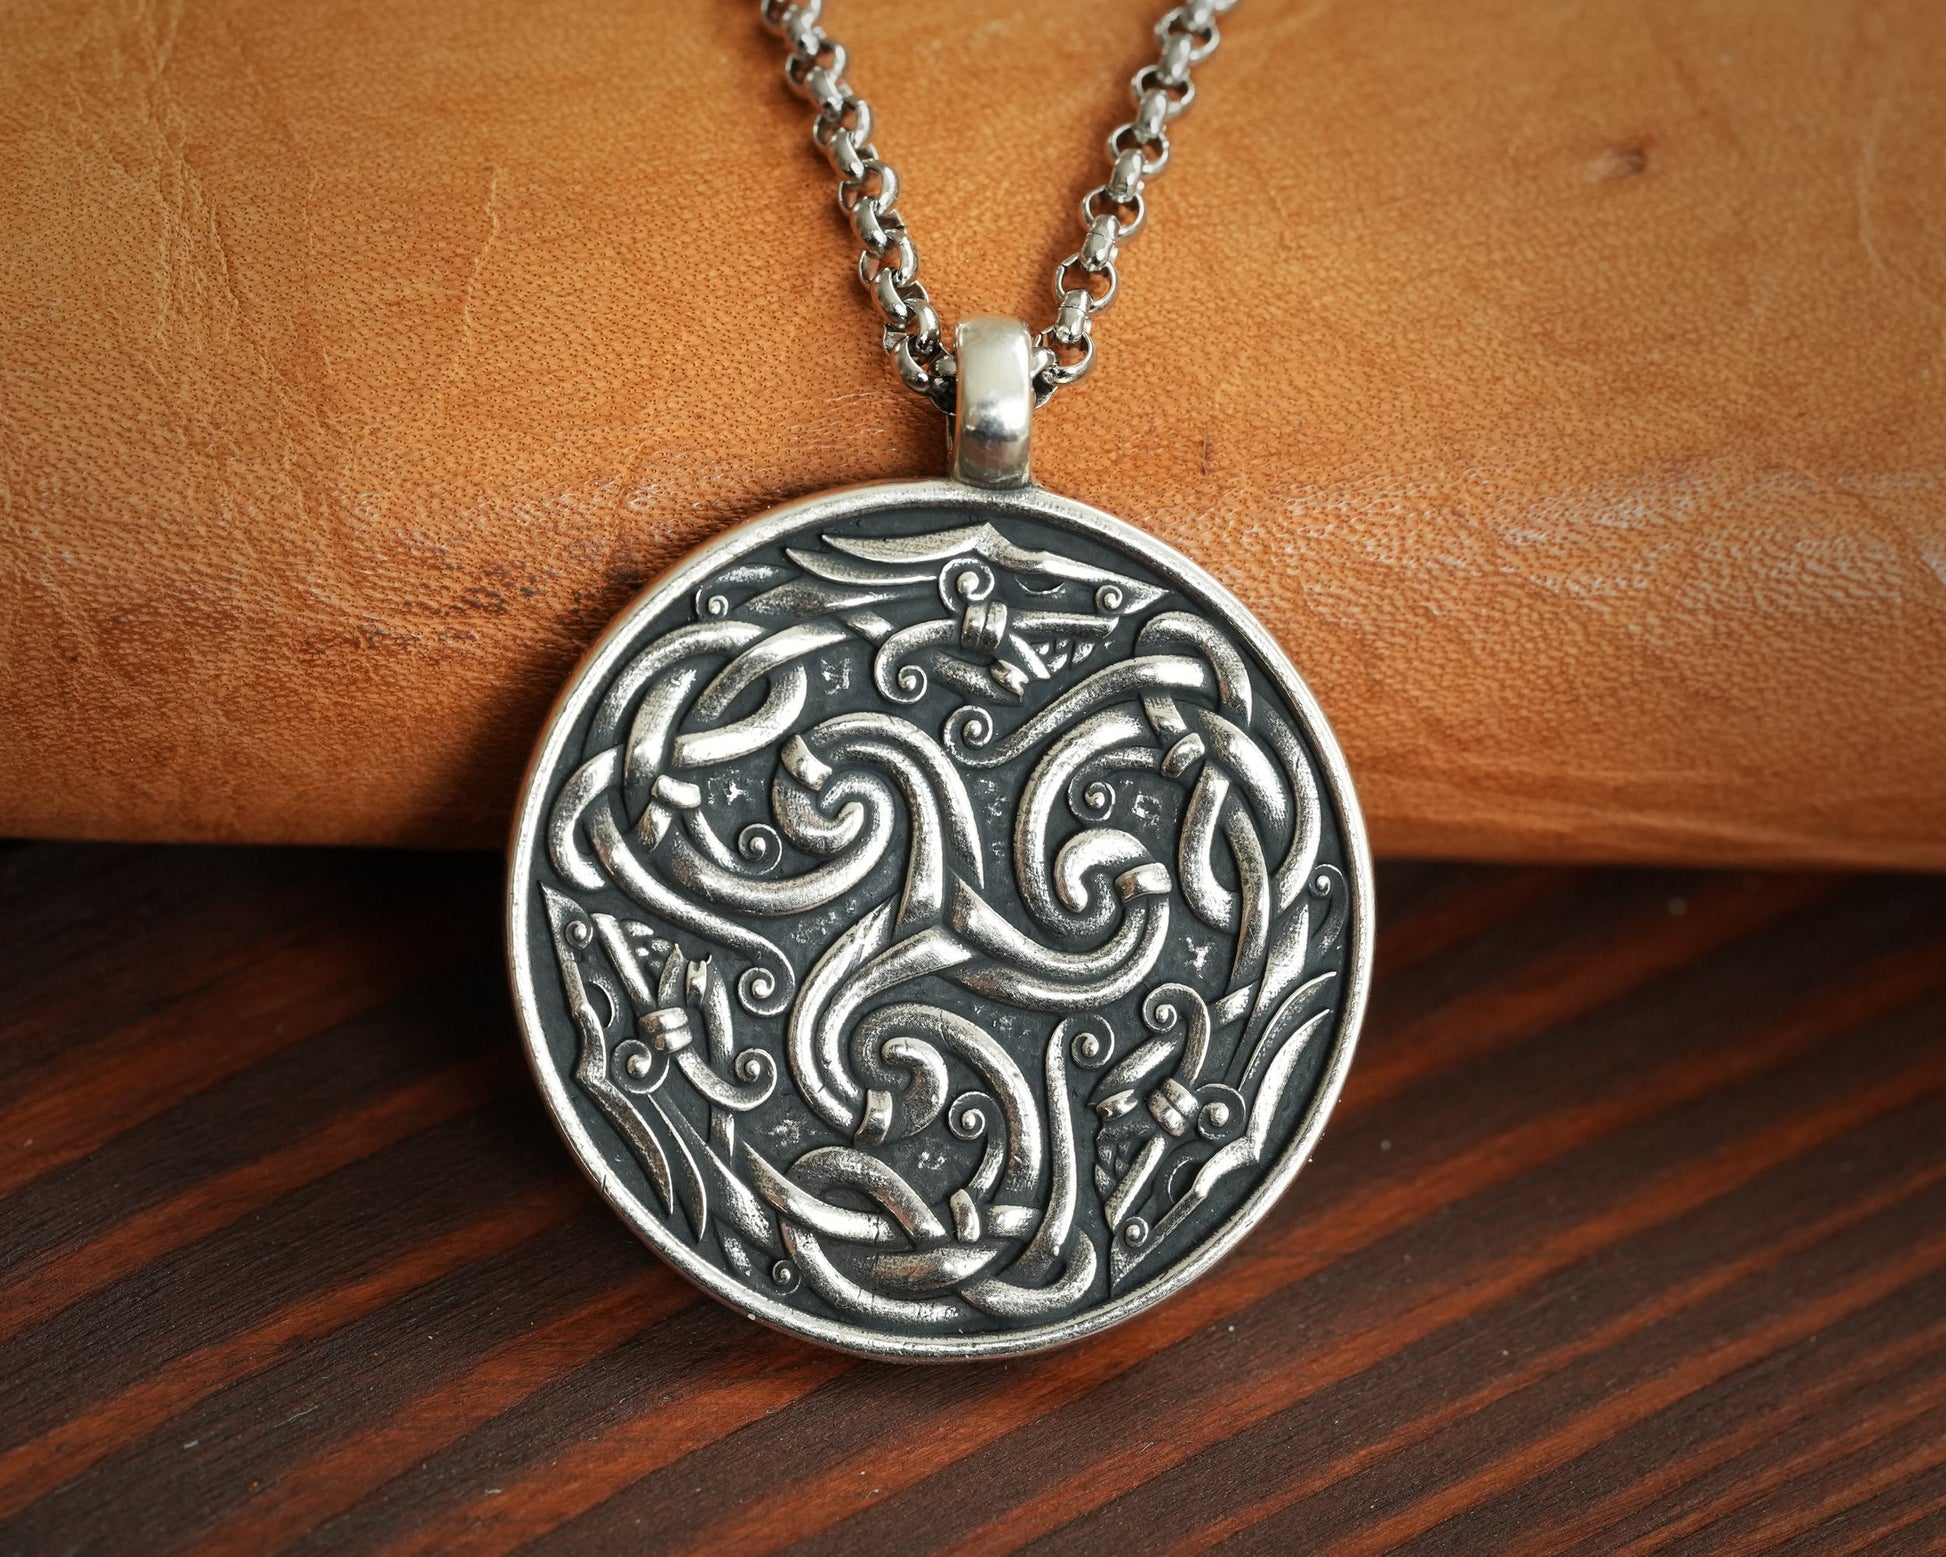 Viking Celtic Dragon Triskelion Infinity Endless Cycle Triskele Mens Necklace Pendant Charm Jewelry With Chain - Baldur Jewelry